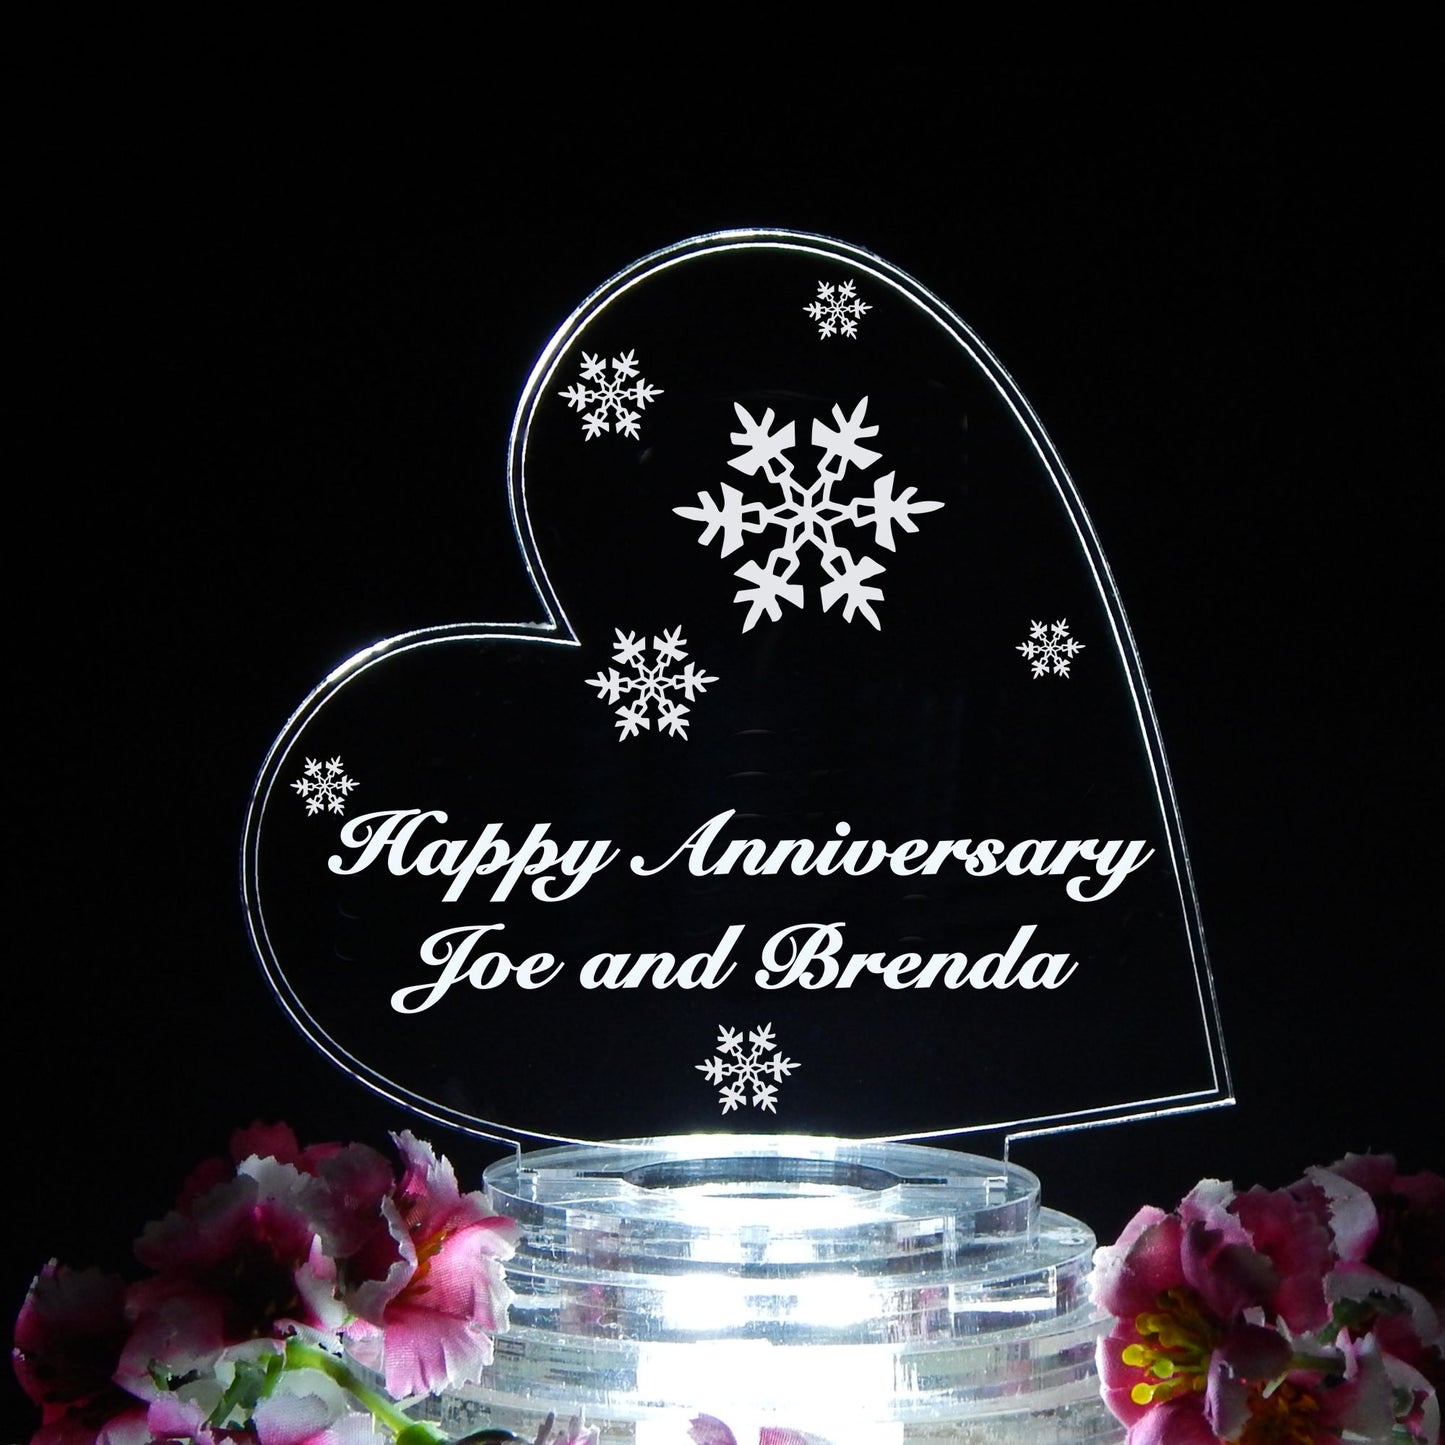 heart shaped cake topper designed with wedding snowflakes and engraved with Happy Anniversary and names